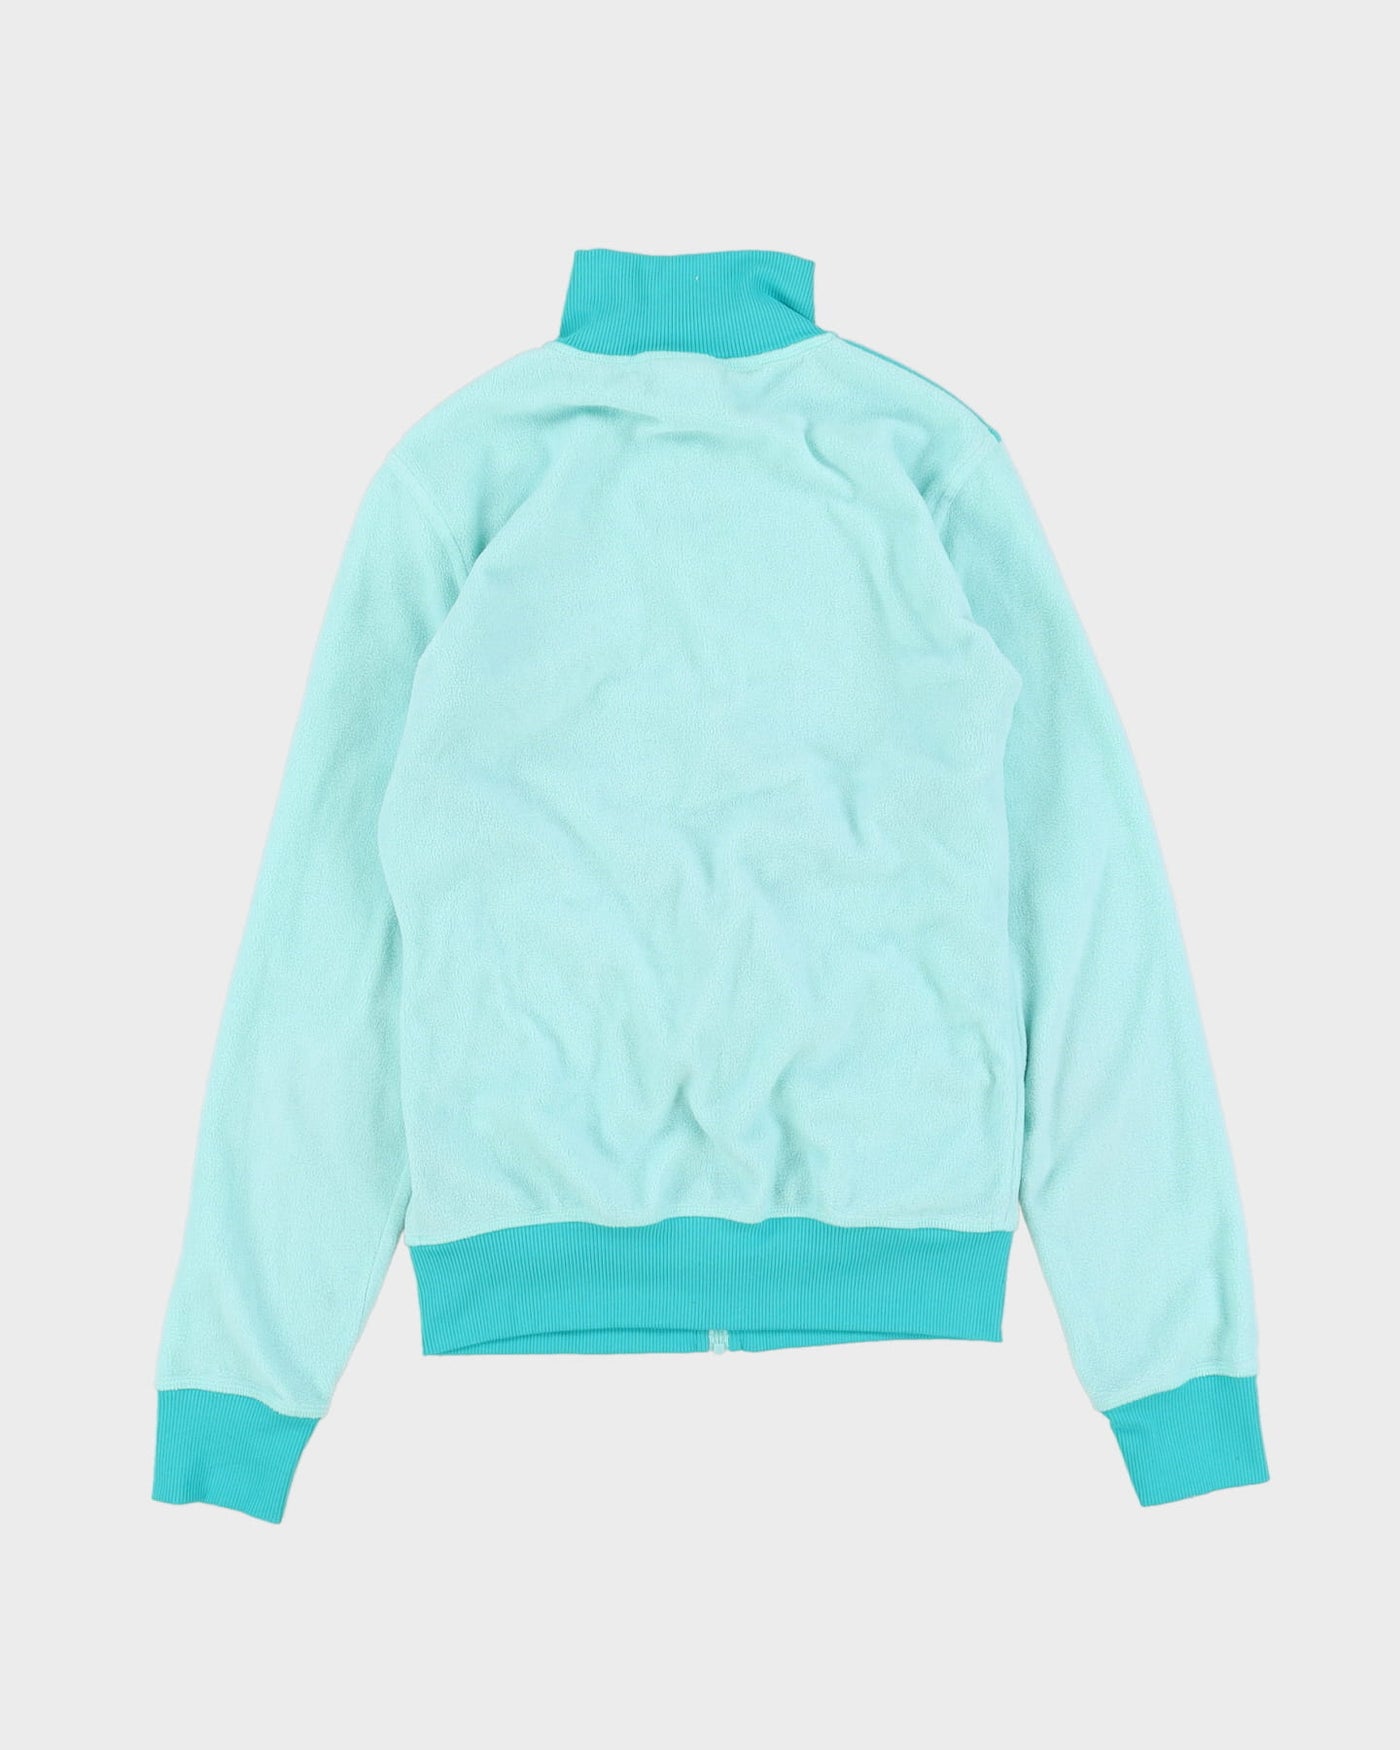 The North Face Blue Two-Tone Full-Zip Fleece - S